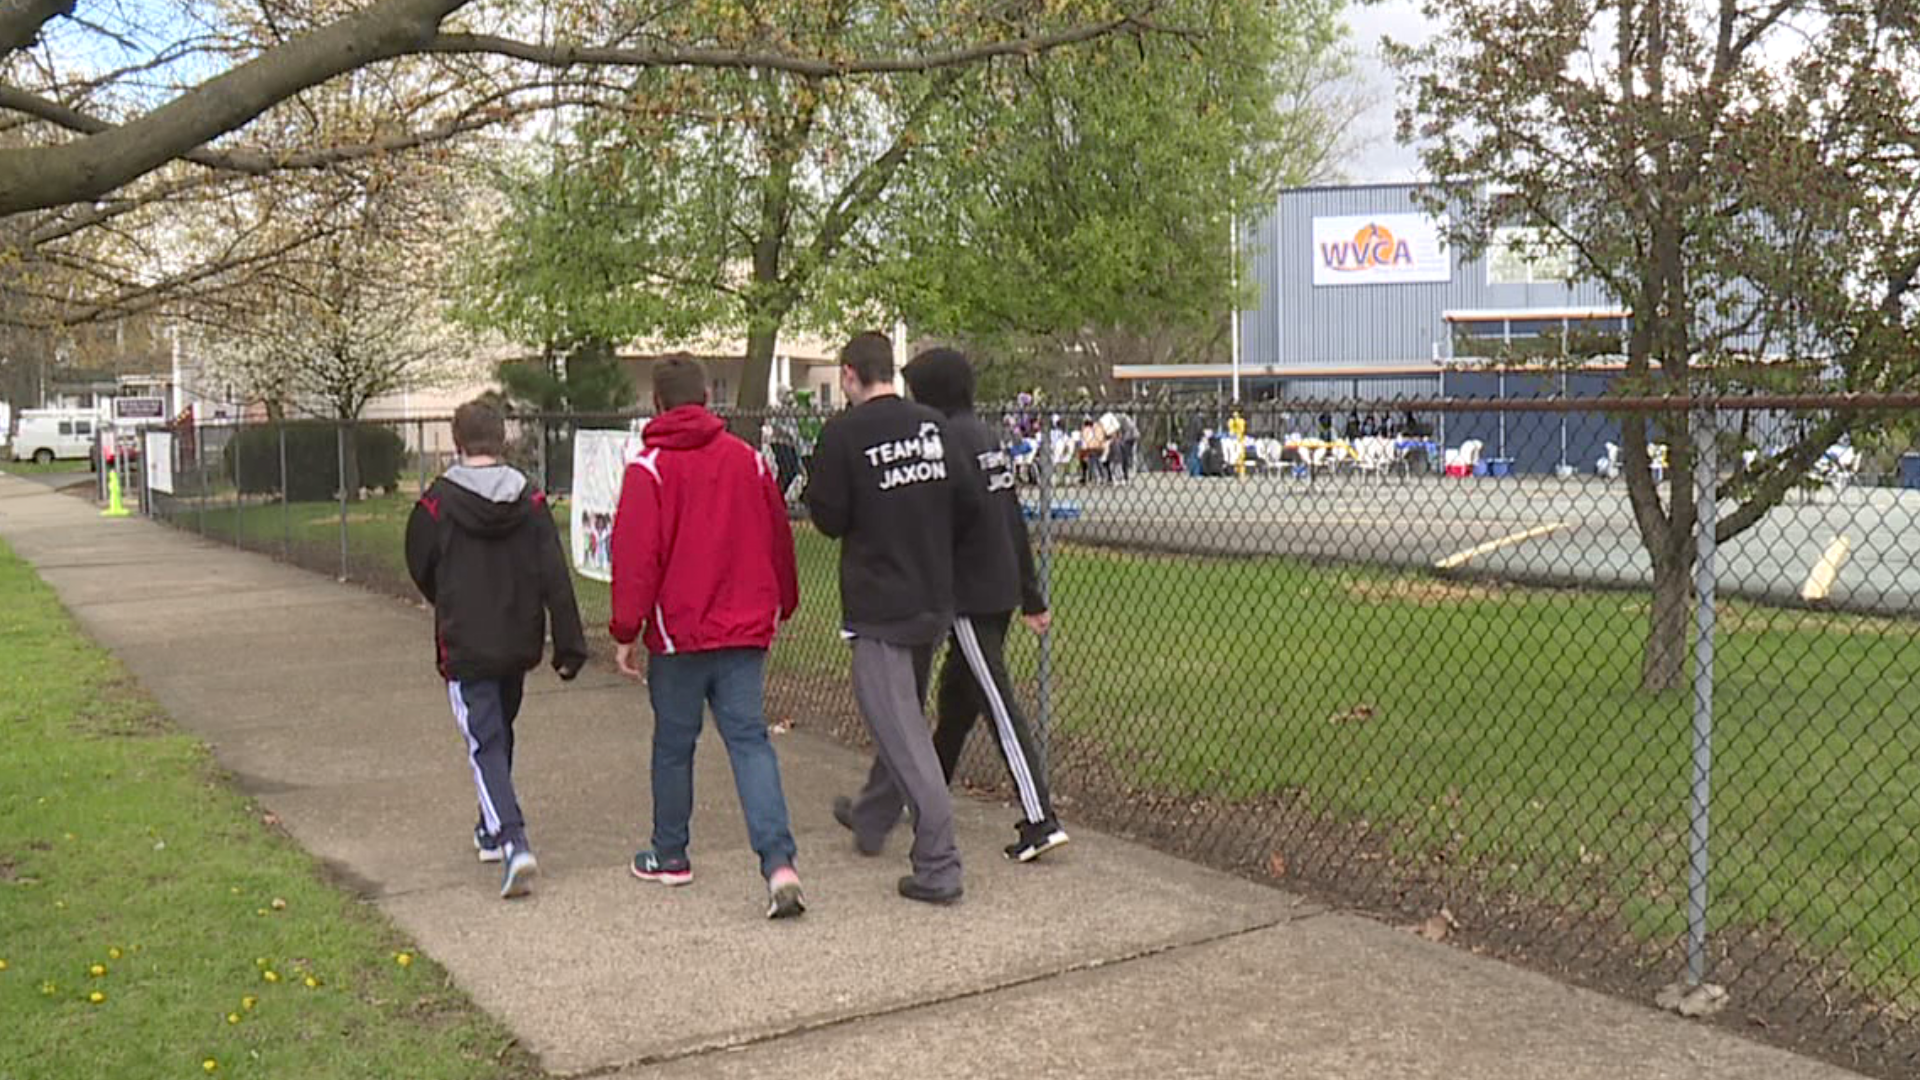 Saturday marked the 29th annual Walk-A-Thon hosted by the Wyoming Valley Children's Association.